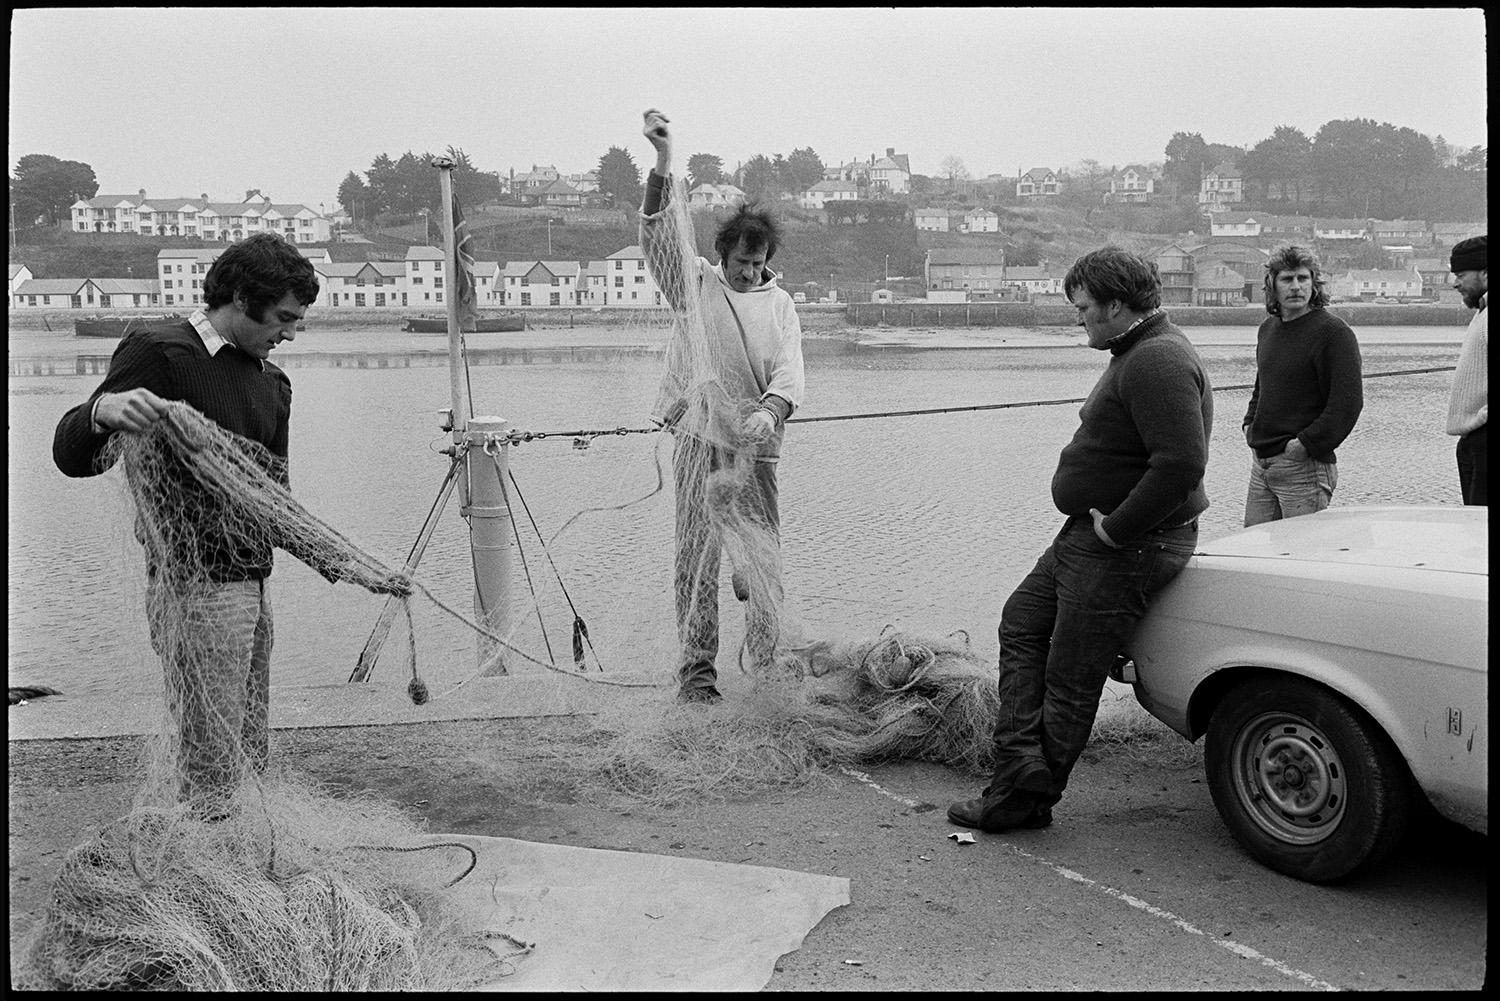 River and quay, oarsmen, fishermen mending nets, old bridge in background, fishing boats. 
[Fishermen sorting and mending their fishing nets on Bideford Quay. The River Torridge and houses on the opposite side of the river can be seen in the background.]